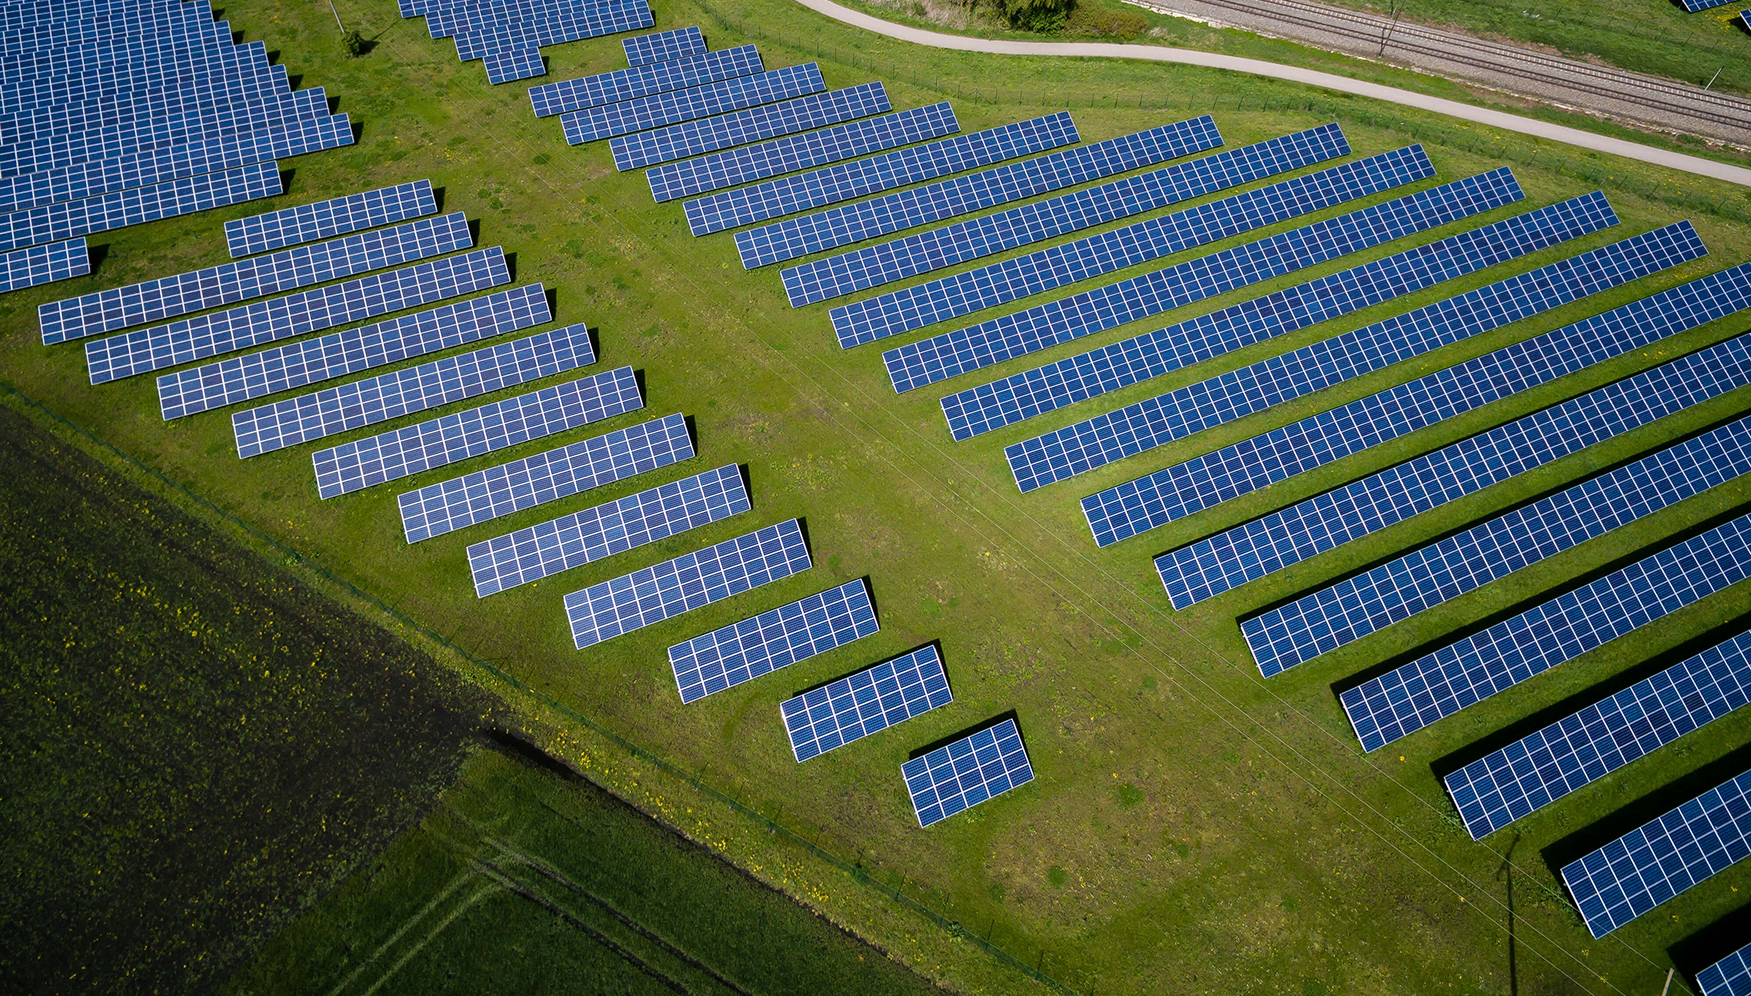 Aerial view of solar panels in a field